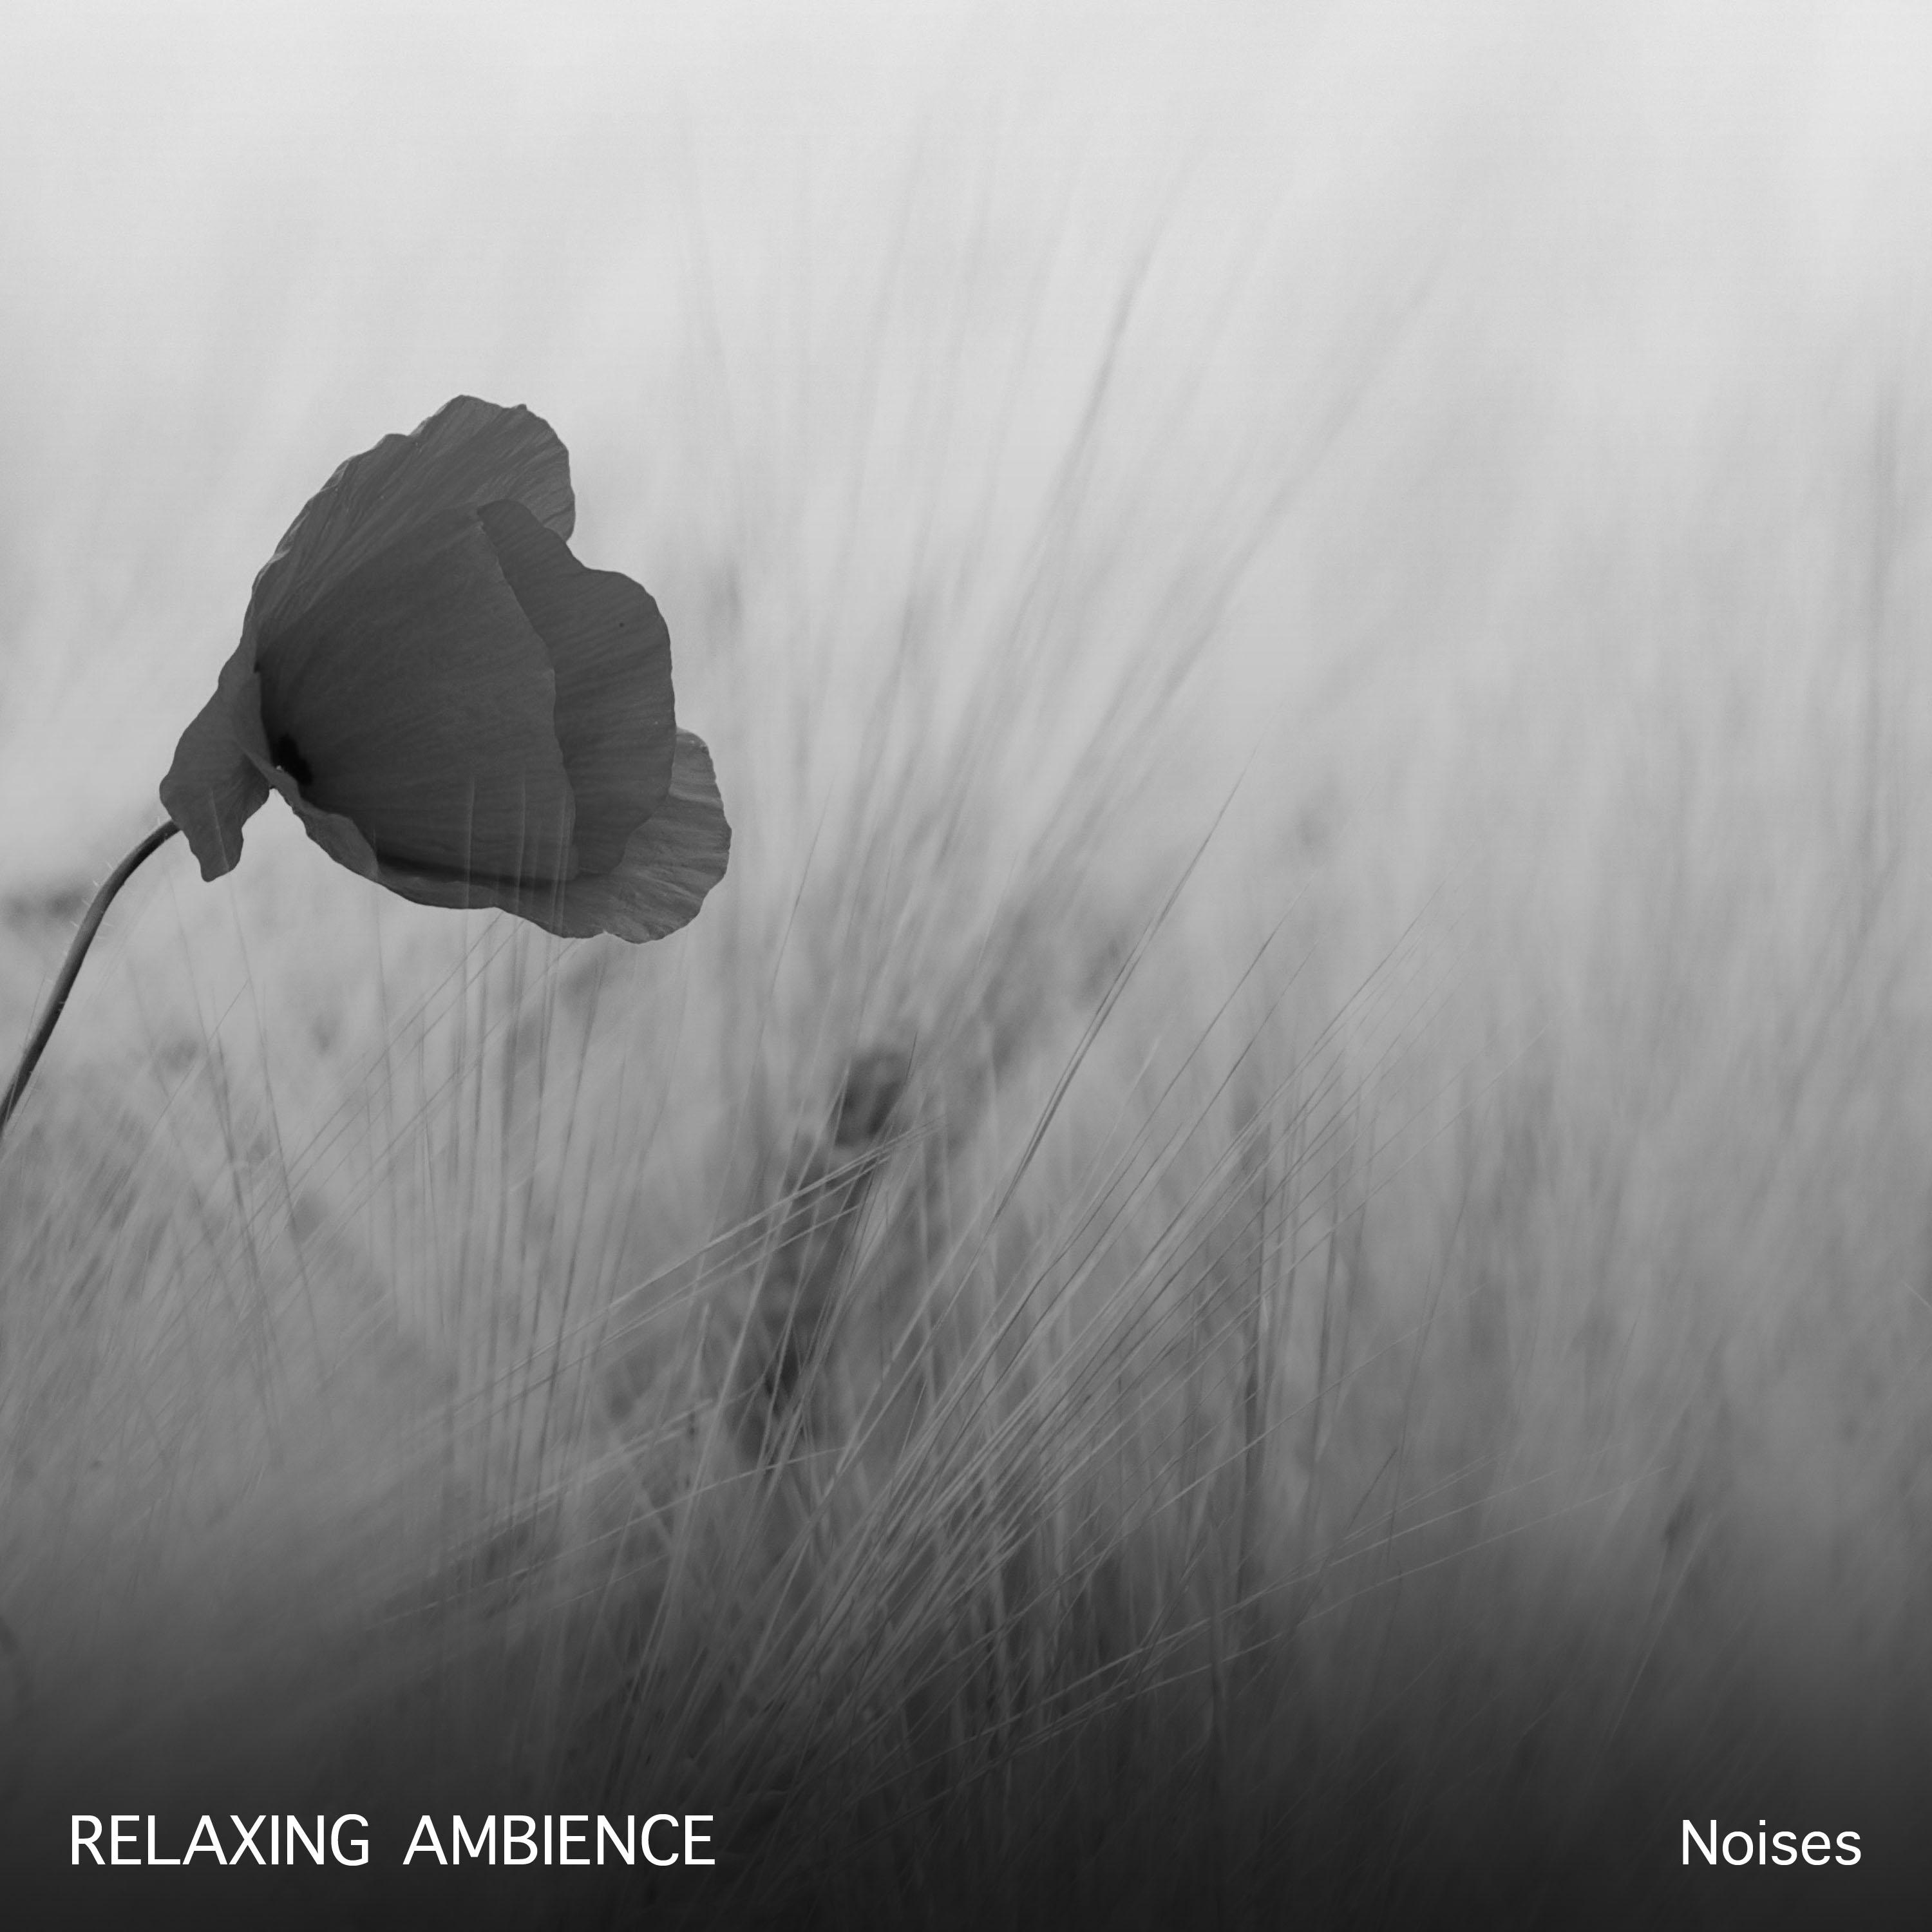 19 Relaxing Ambience Noises for Relaxation Therapy